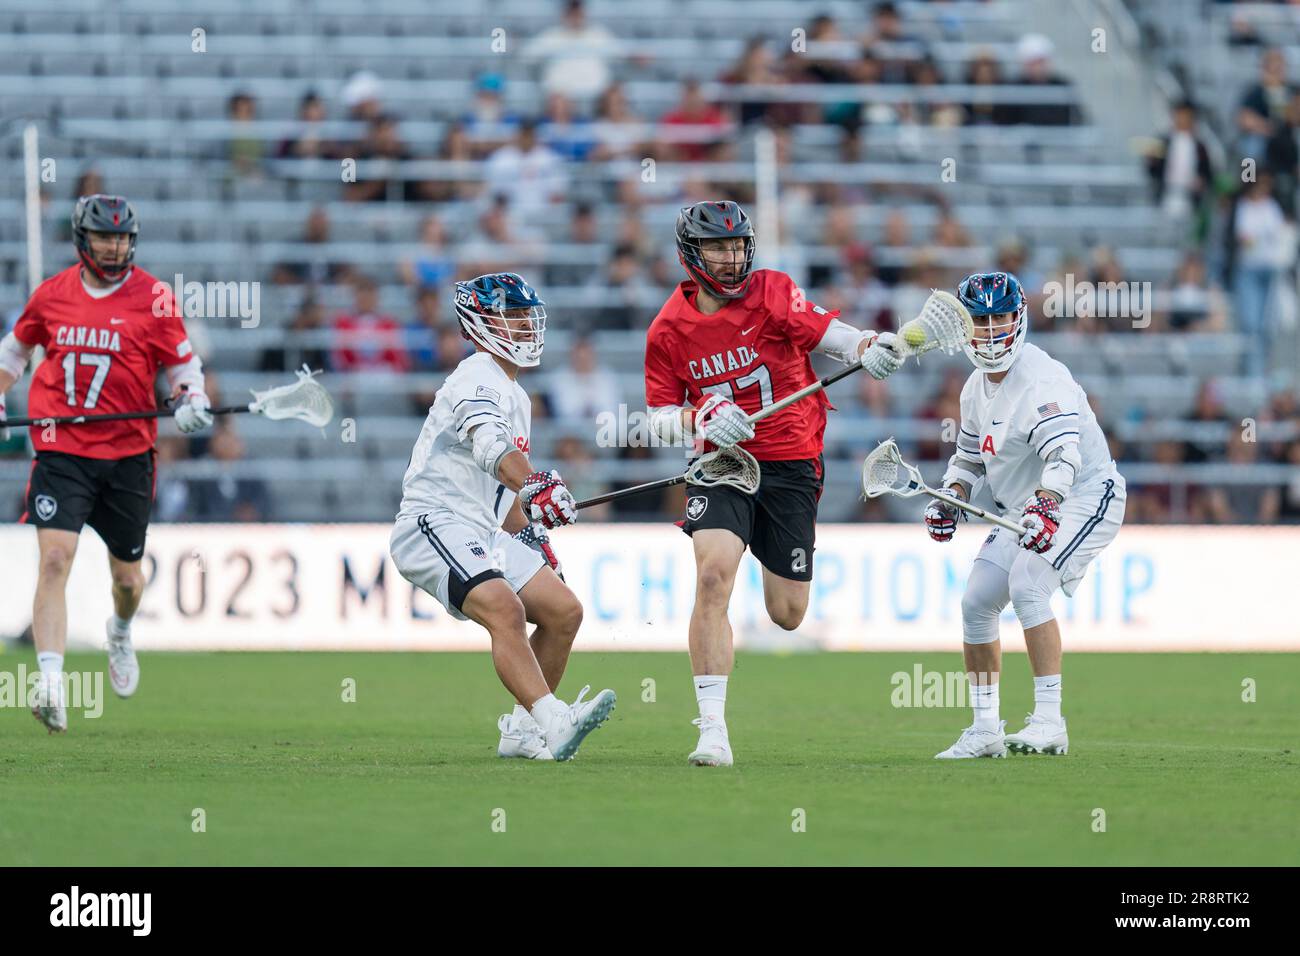 San Diego, USA. 21st June, 2023. Zach Currier (77) breaks through the USA defense at the World Lacrosse Men's Championship opening game USA vs Canada at Snapdragon Stadium. Credit: Ben Nichols/Alamy Live News Stock Photo